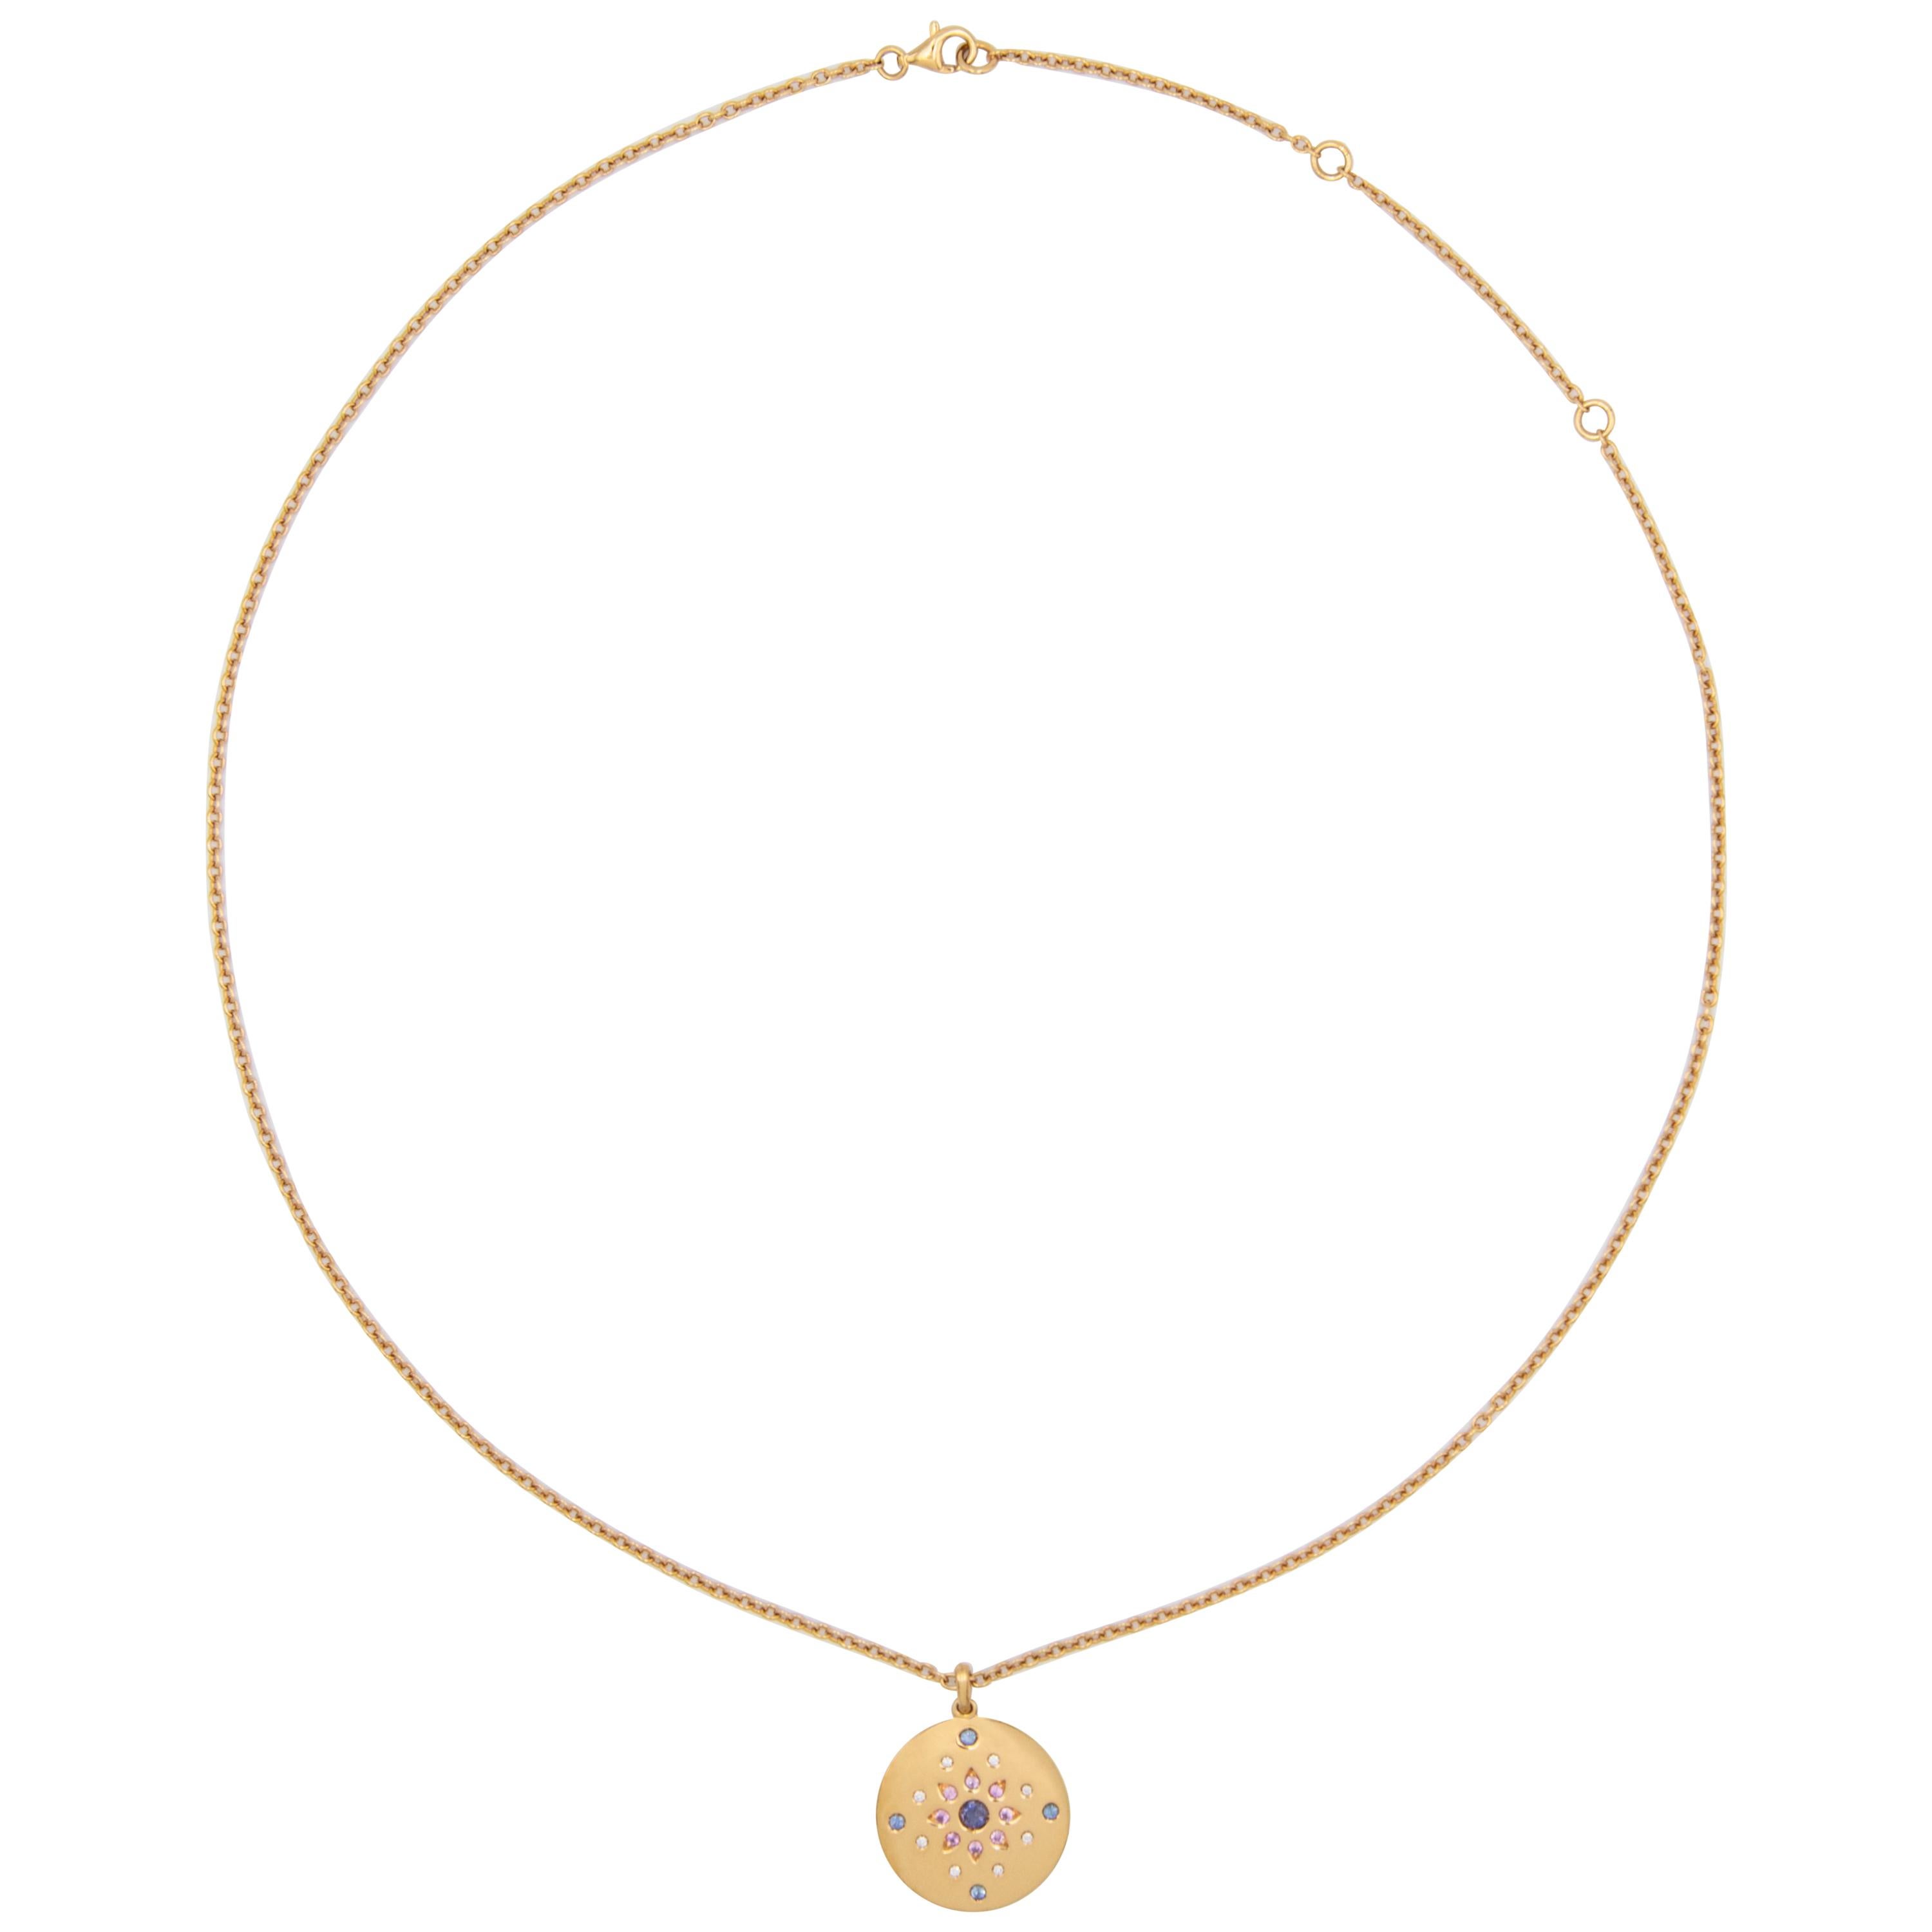 18 karat yellow gold necklace with round disc pendant and adjustable long chain. The pendant is set with 21 gemstones including a central iolite, 0,28-carat of blue and pink sapphires and 0,11-carat of diamonds. 

This is the longer chain option for